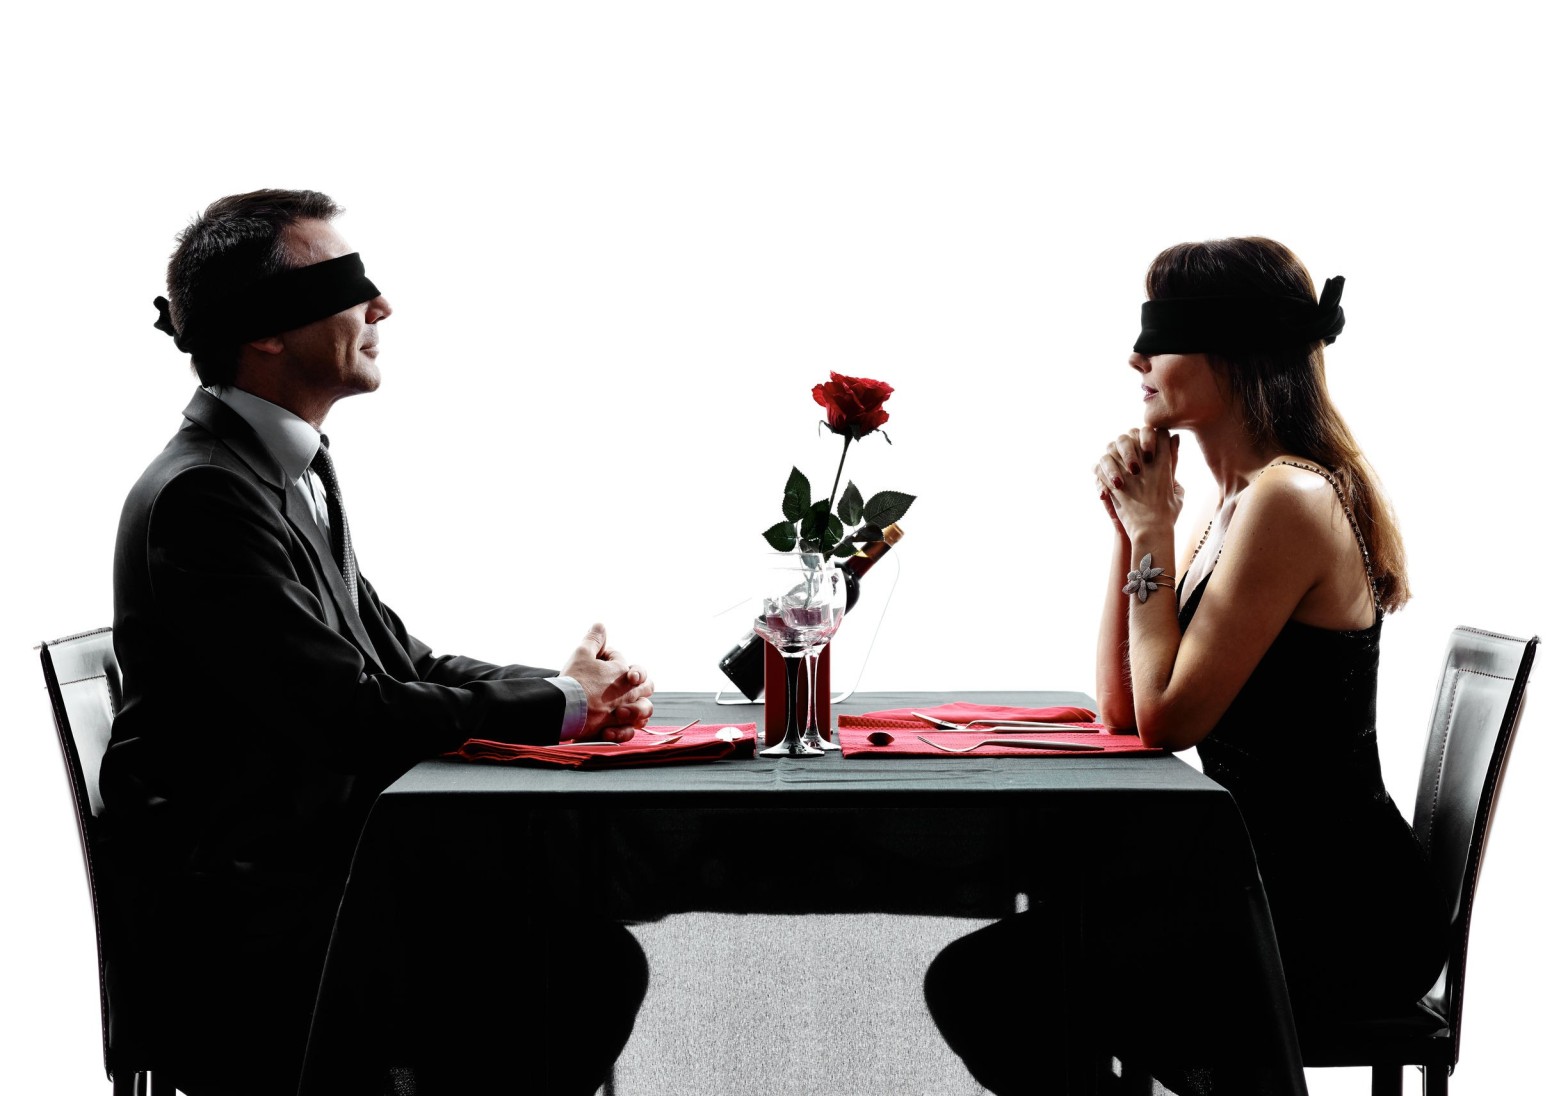 Blind dating : Zoom Style – Cece Sees The World